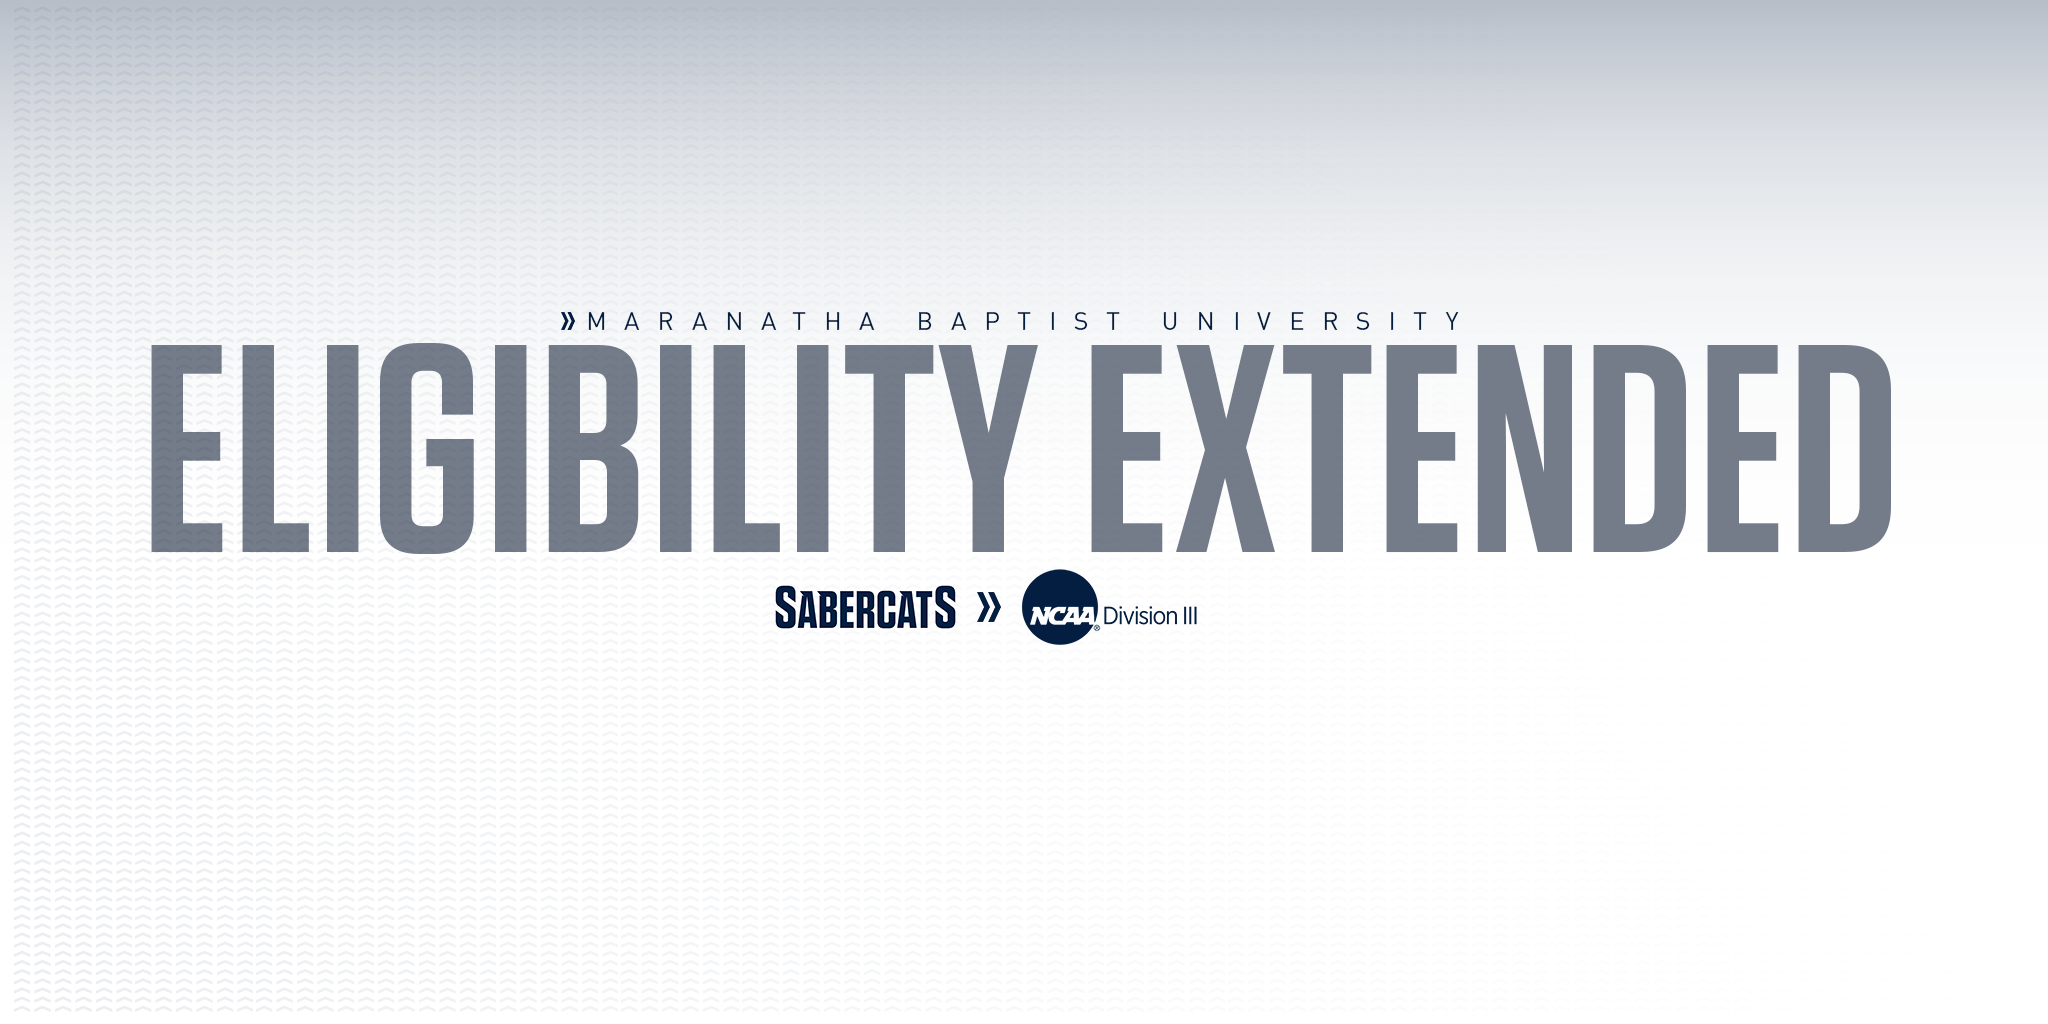 Eligibility Extended